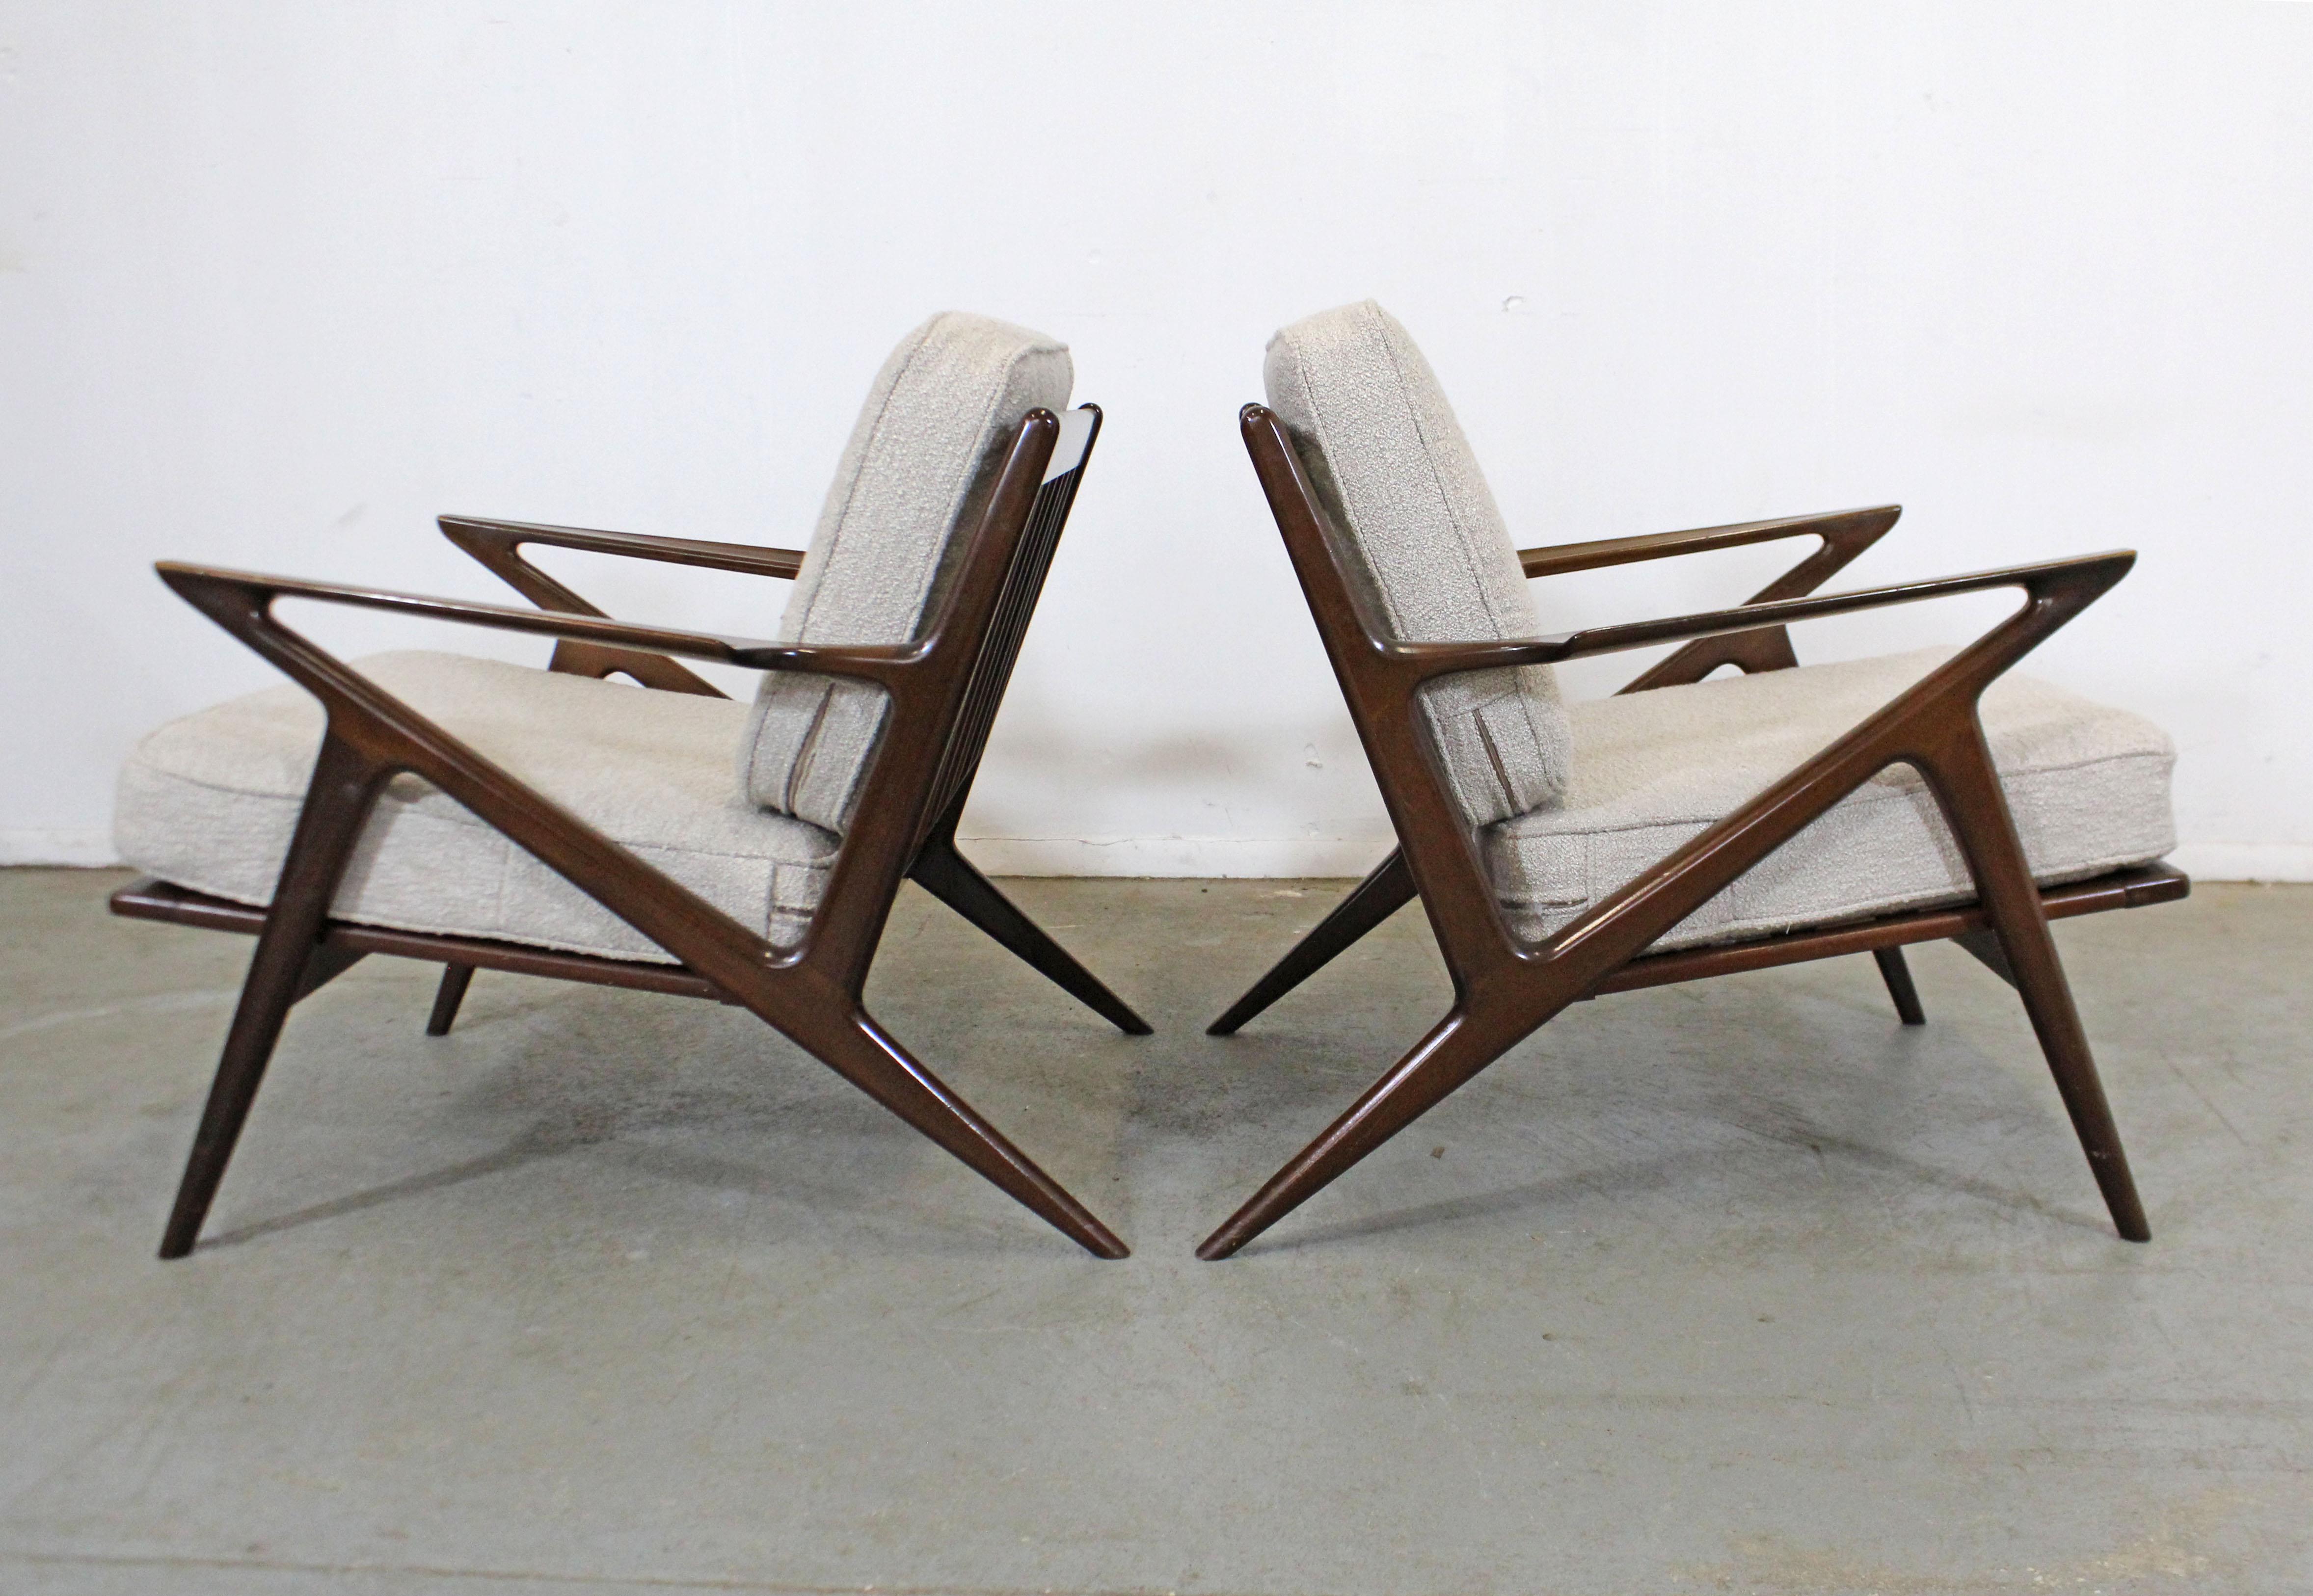 This set includes an iconic pair of authentic Mid-Century Modern 